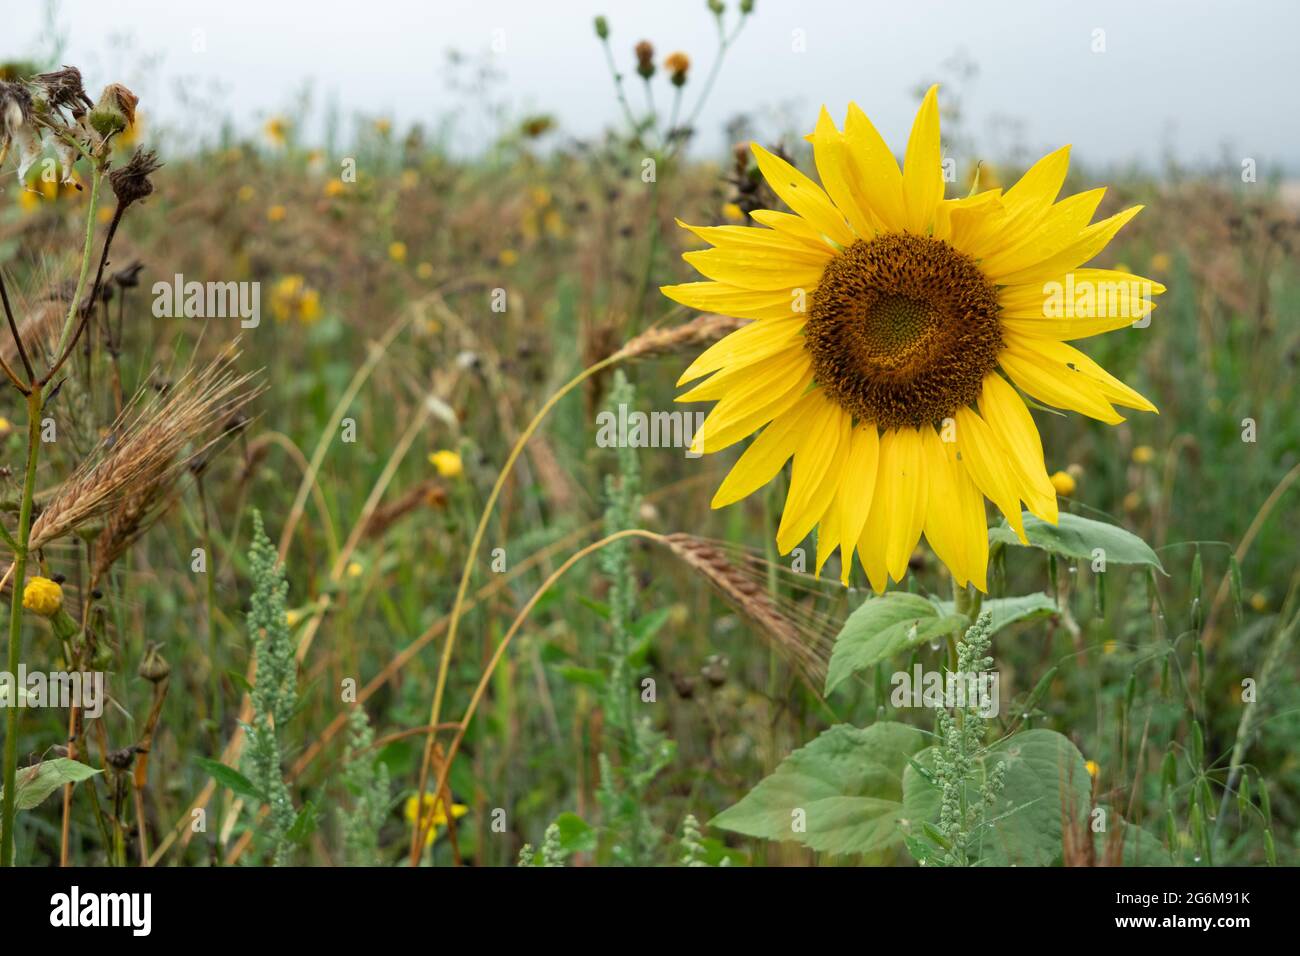 Close up of a single yellow sunflower erect in a field England Stock Photo